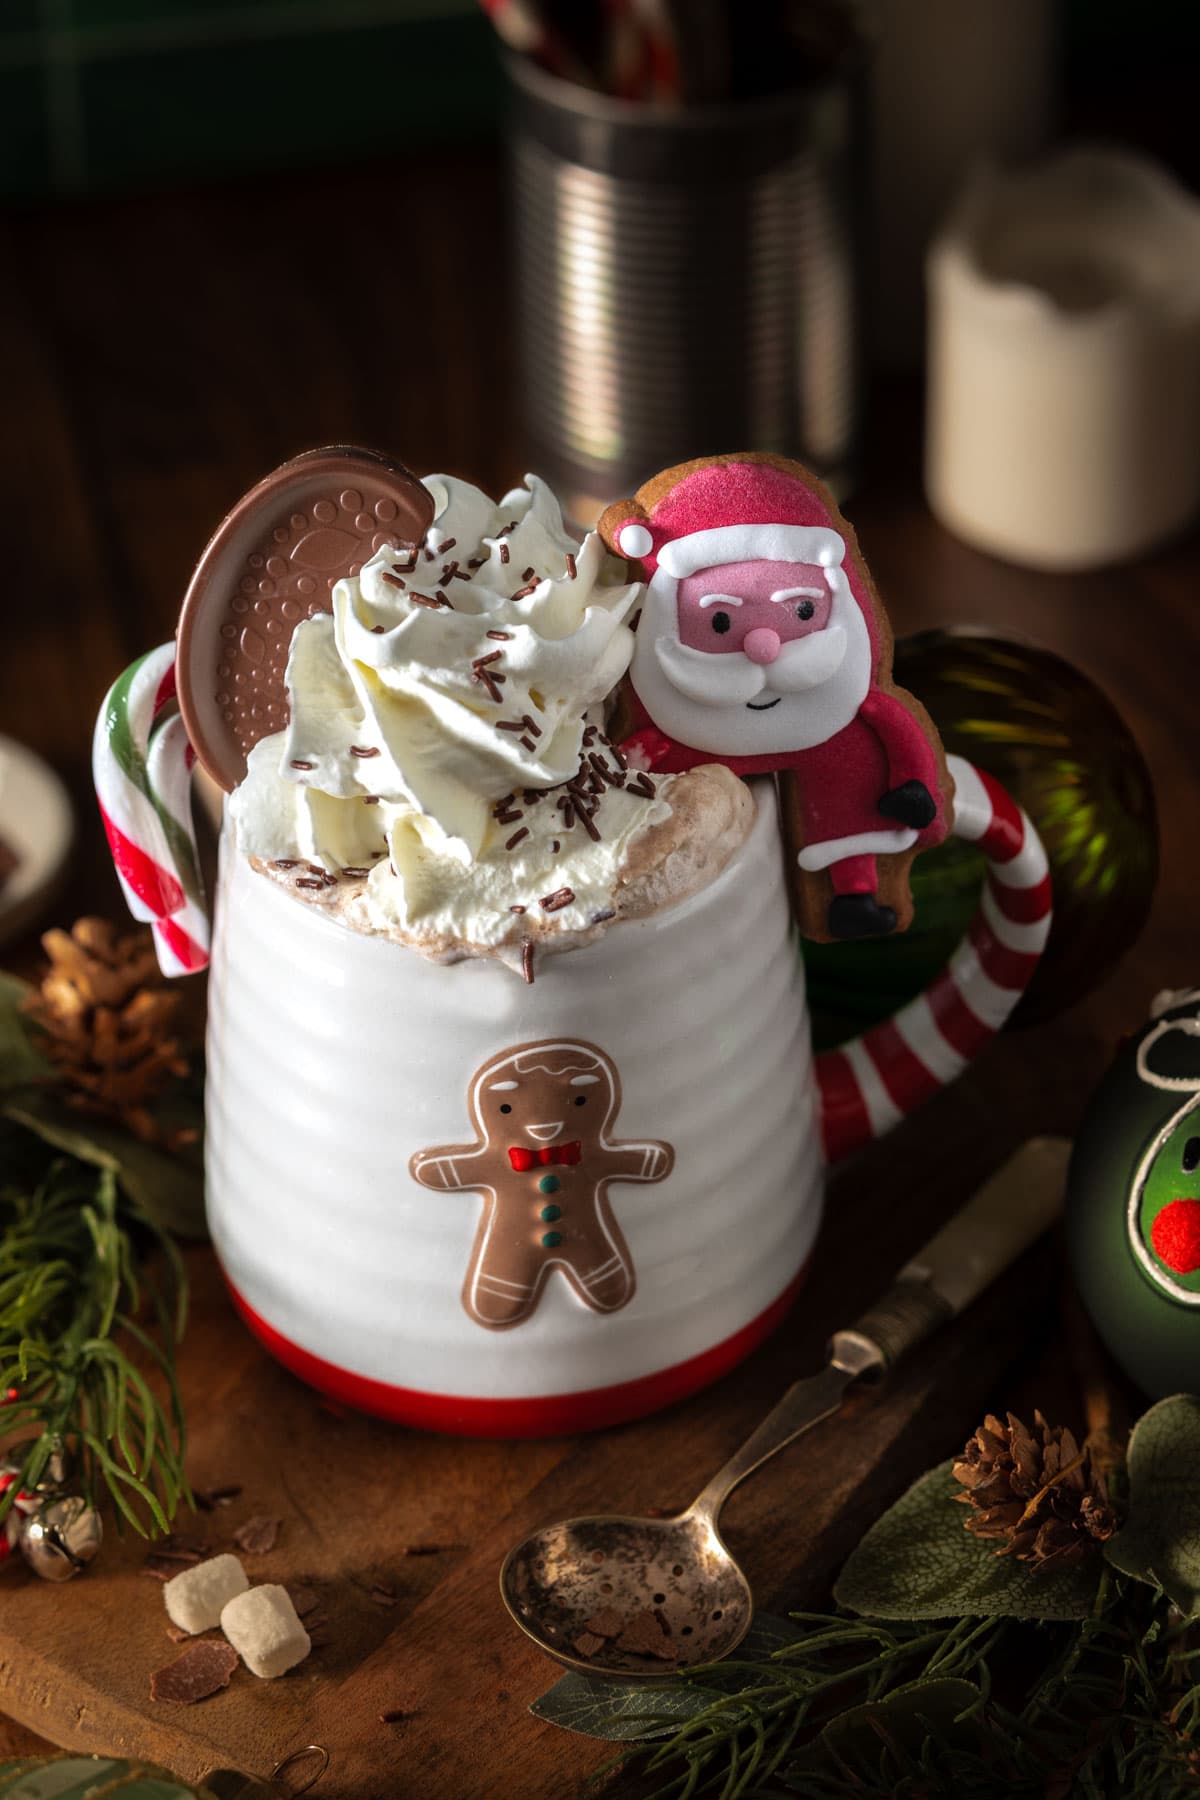 Mint hot chocolate in a red and white mug with a candy cane and whipped cream on top